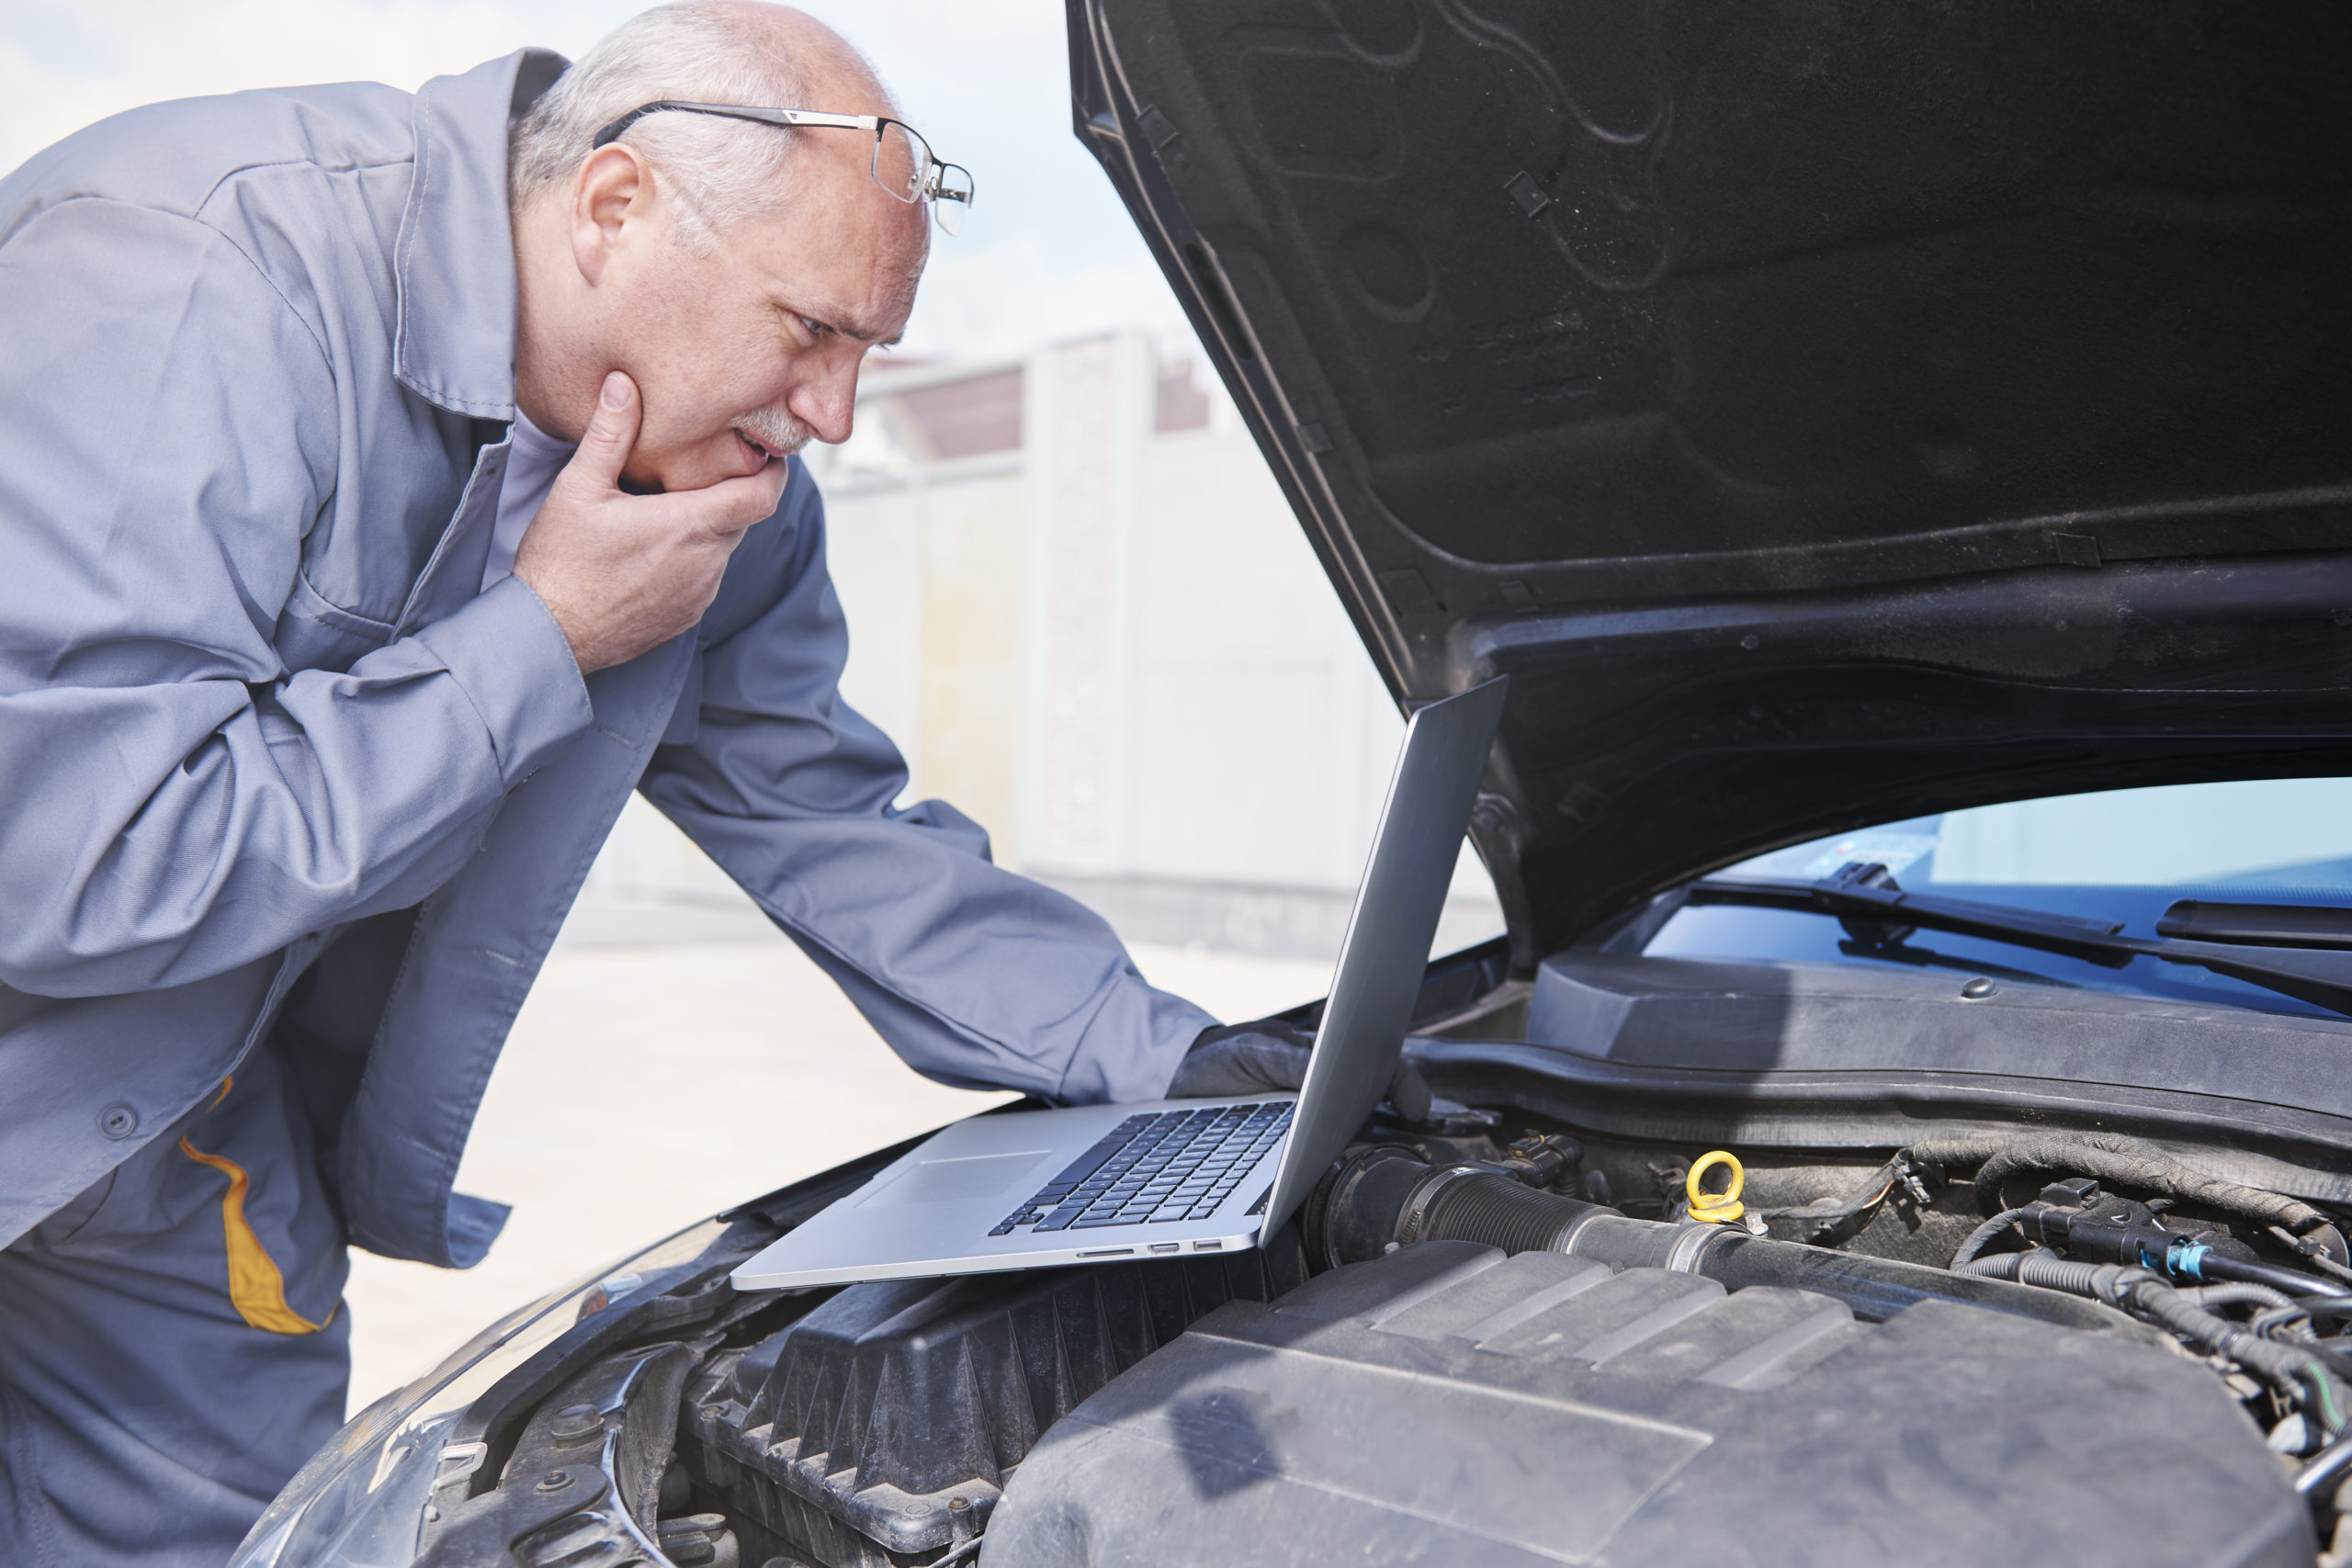 5 problems with current auto repair software